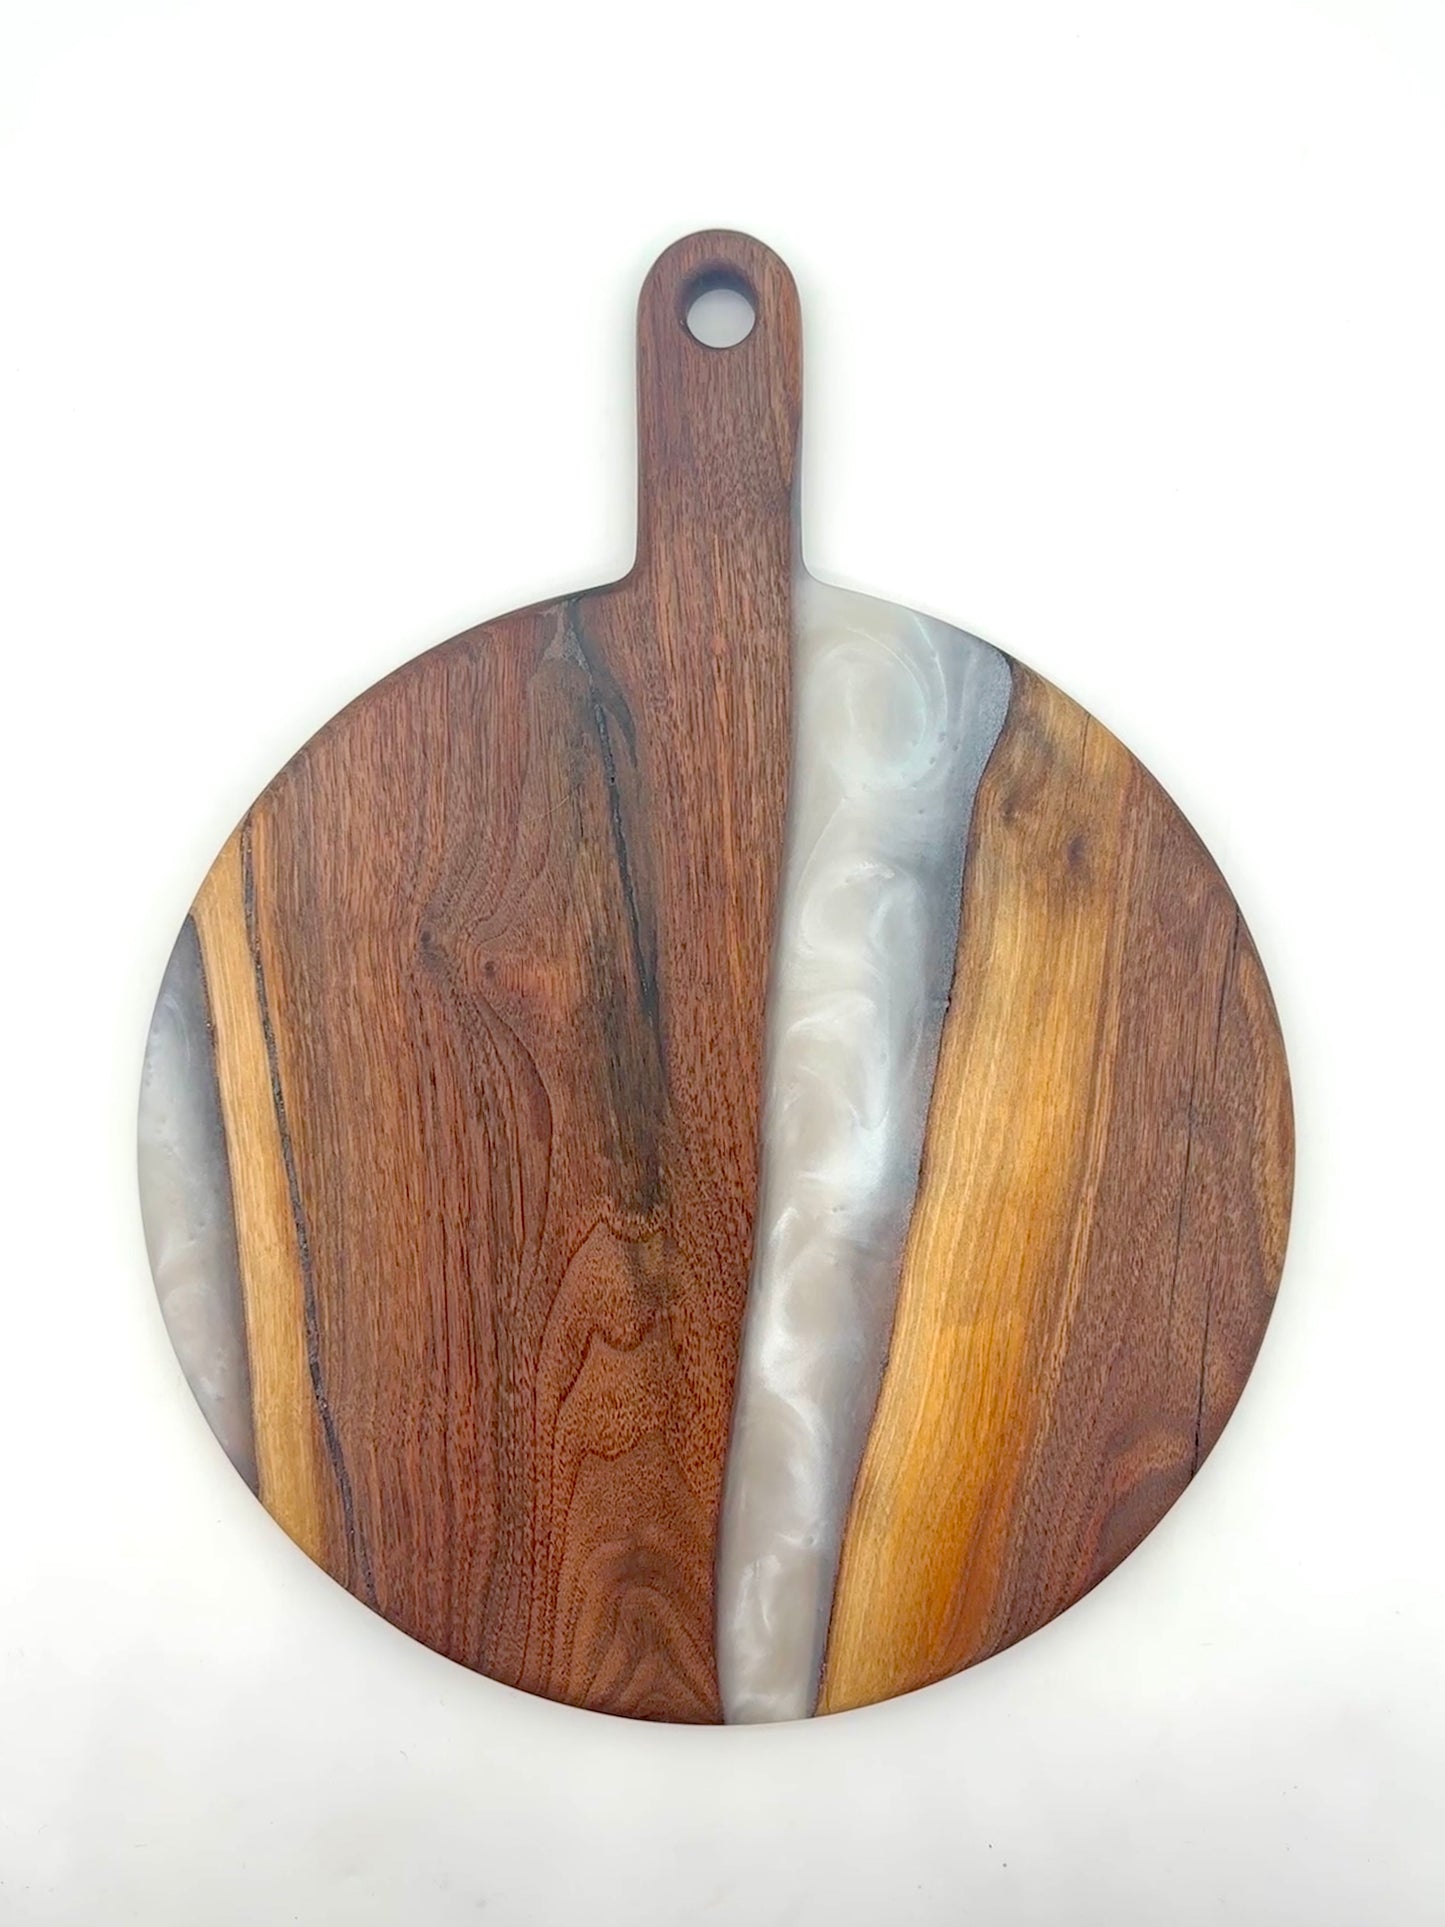 Small round walnut board with pearl white resin